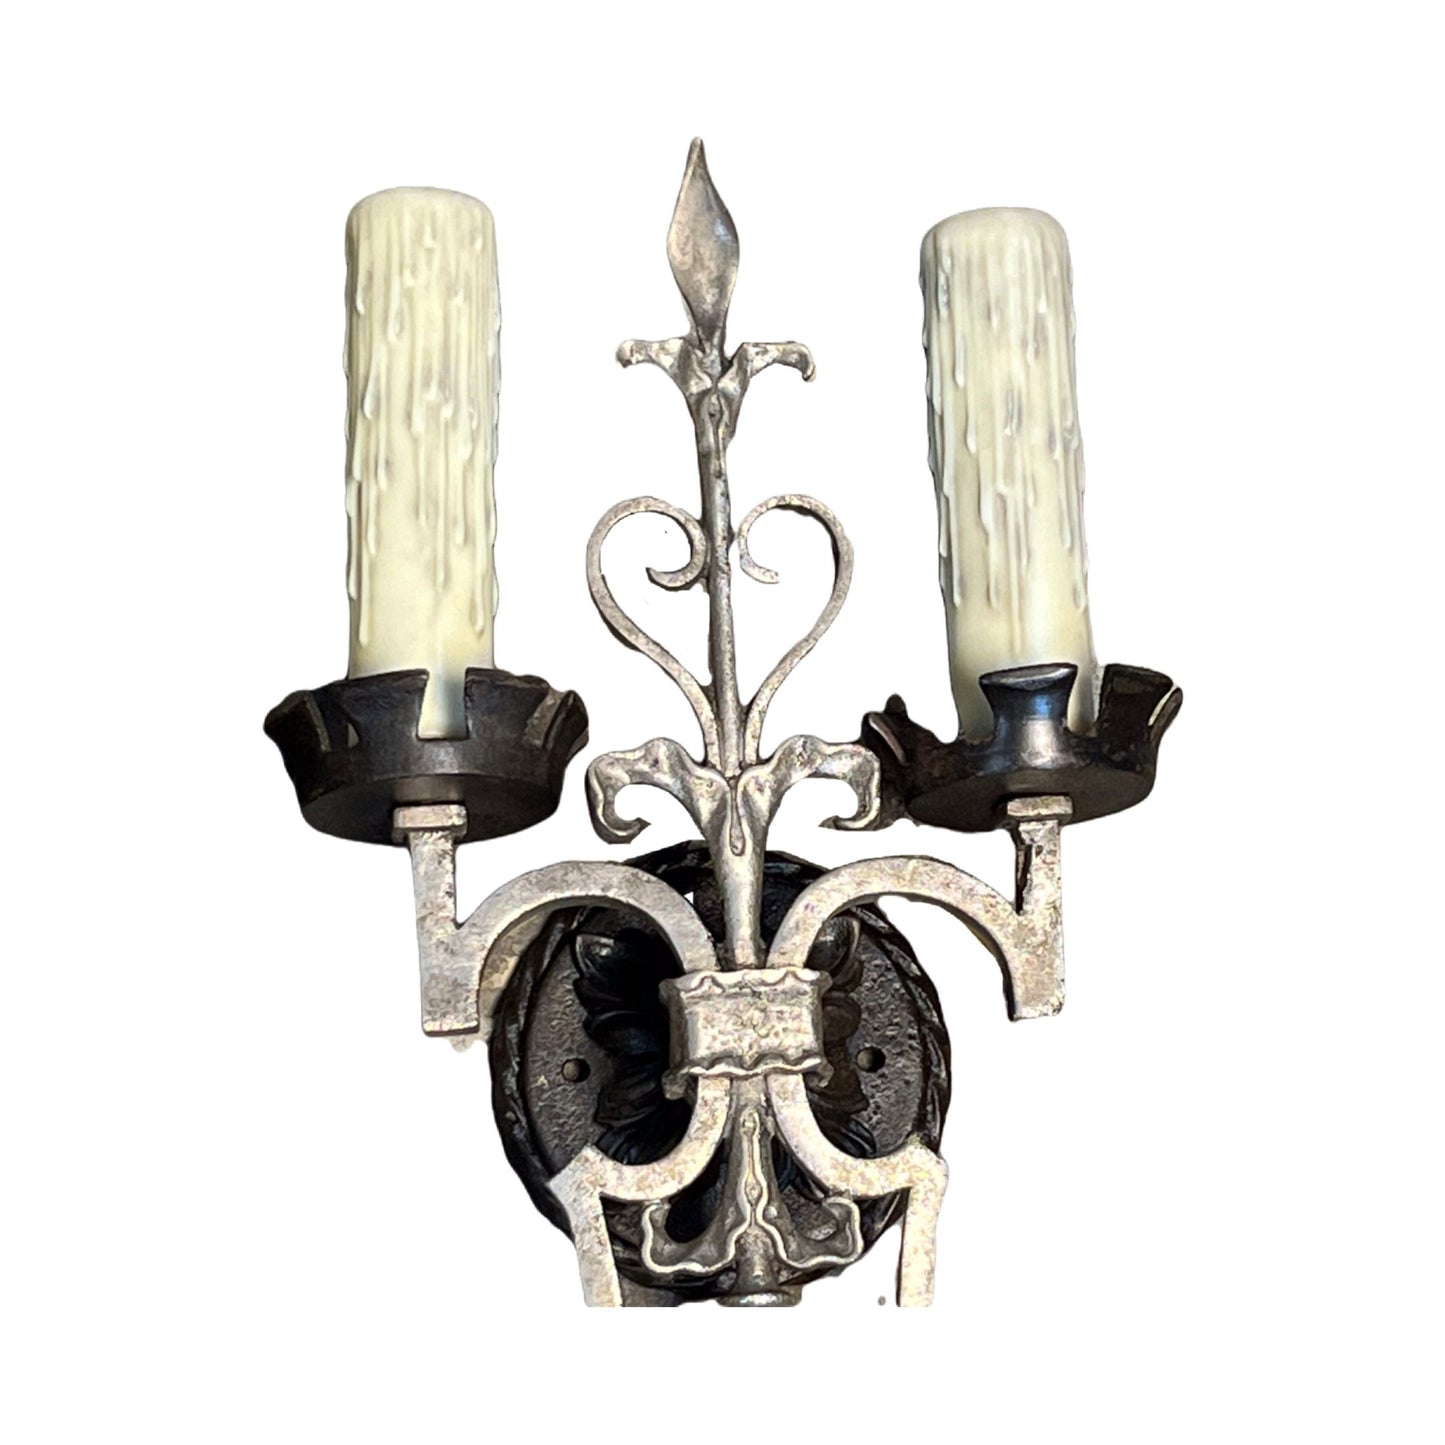 Nickeled Bronze Spanish Revival Wall Sconces